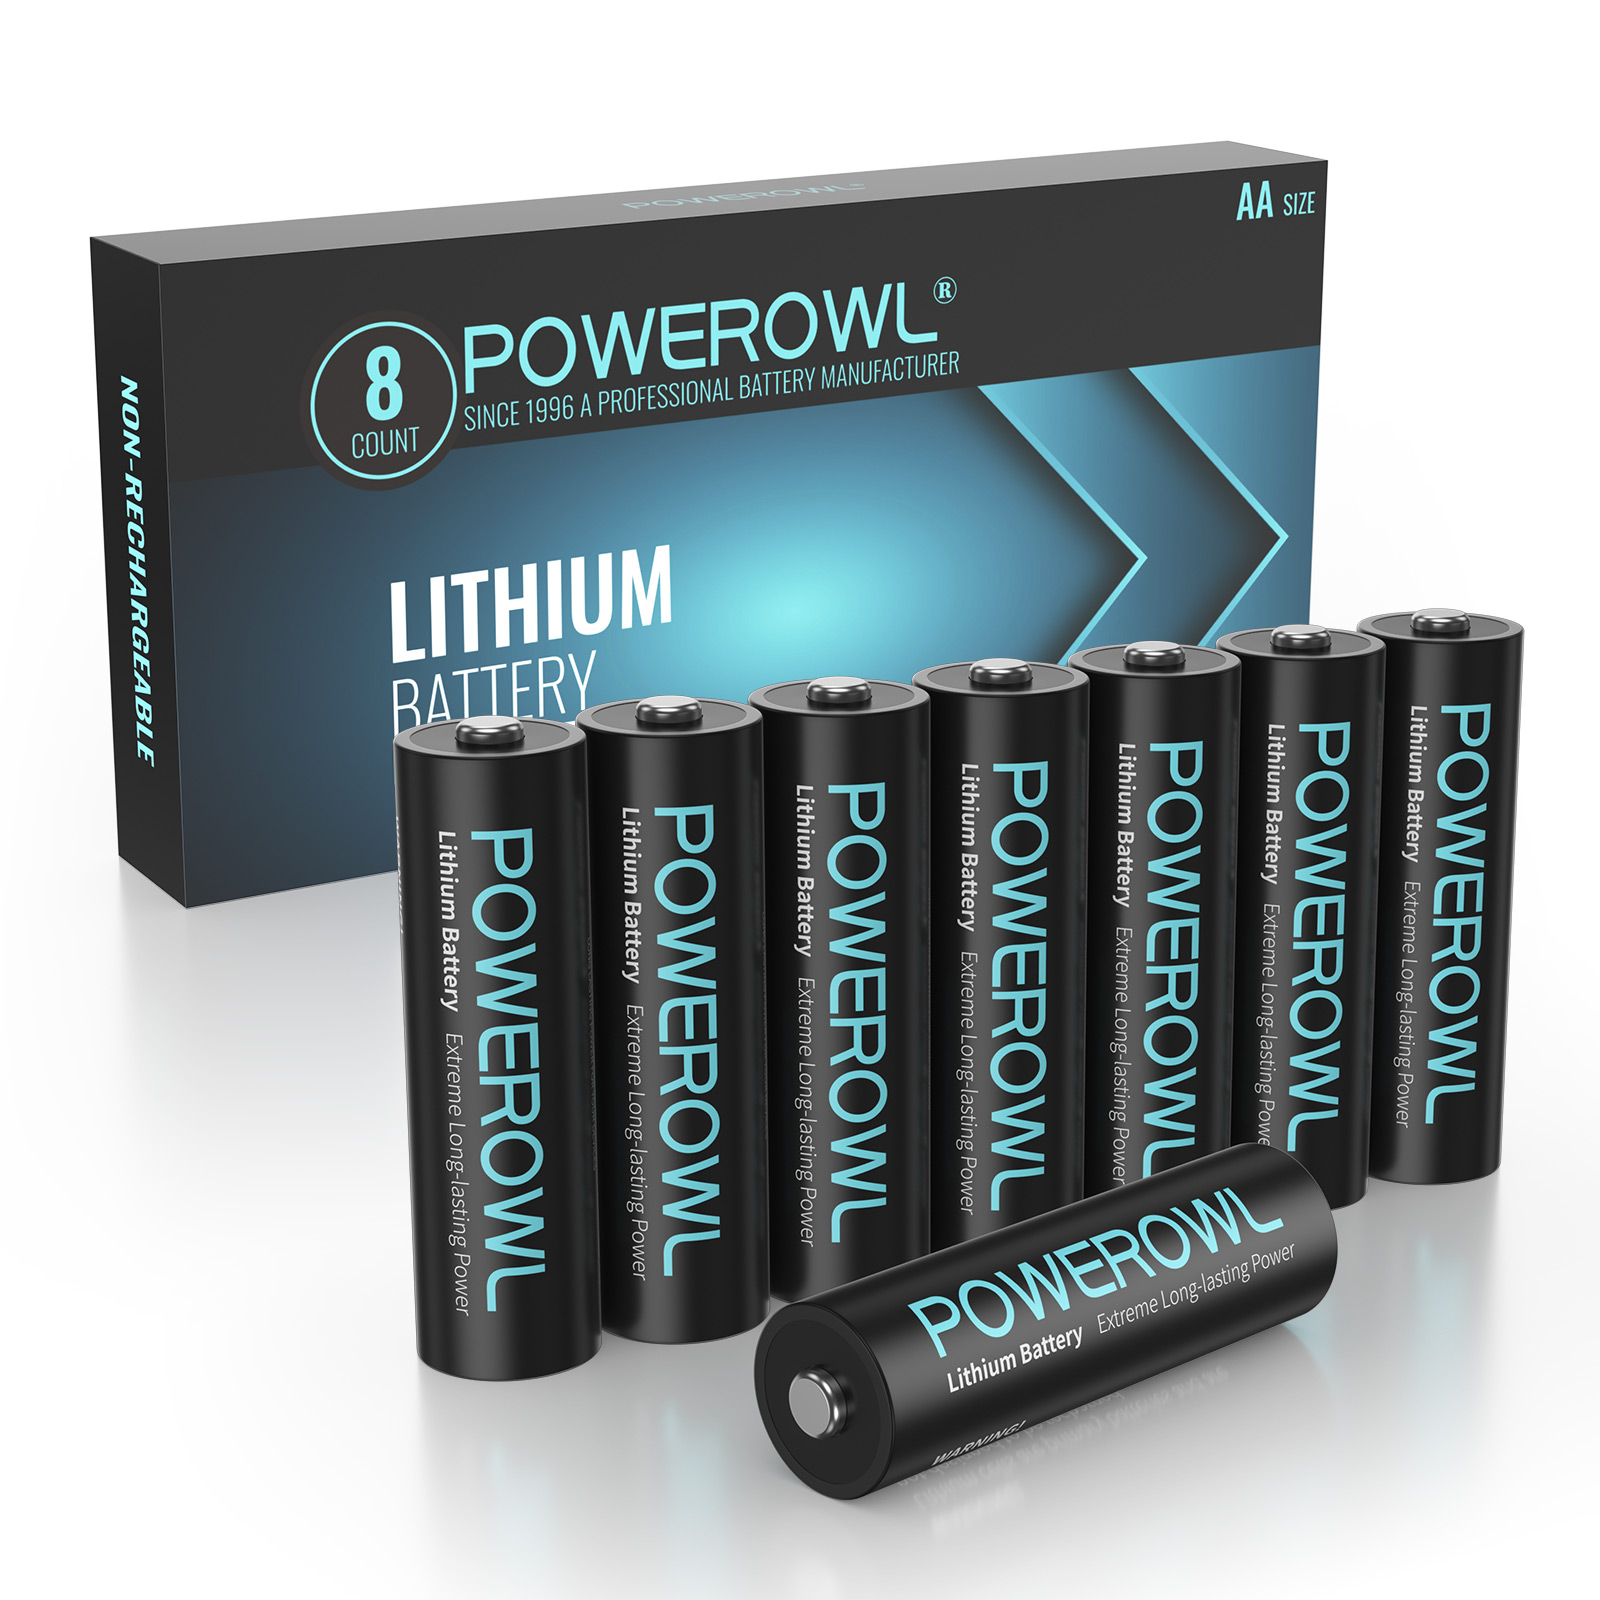 POWEROWL Lithium Batteries AA High Capacity Long Lasting, 1.5V Double A Battery for High-Tech Devices - 8 Pack